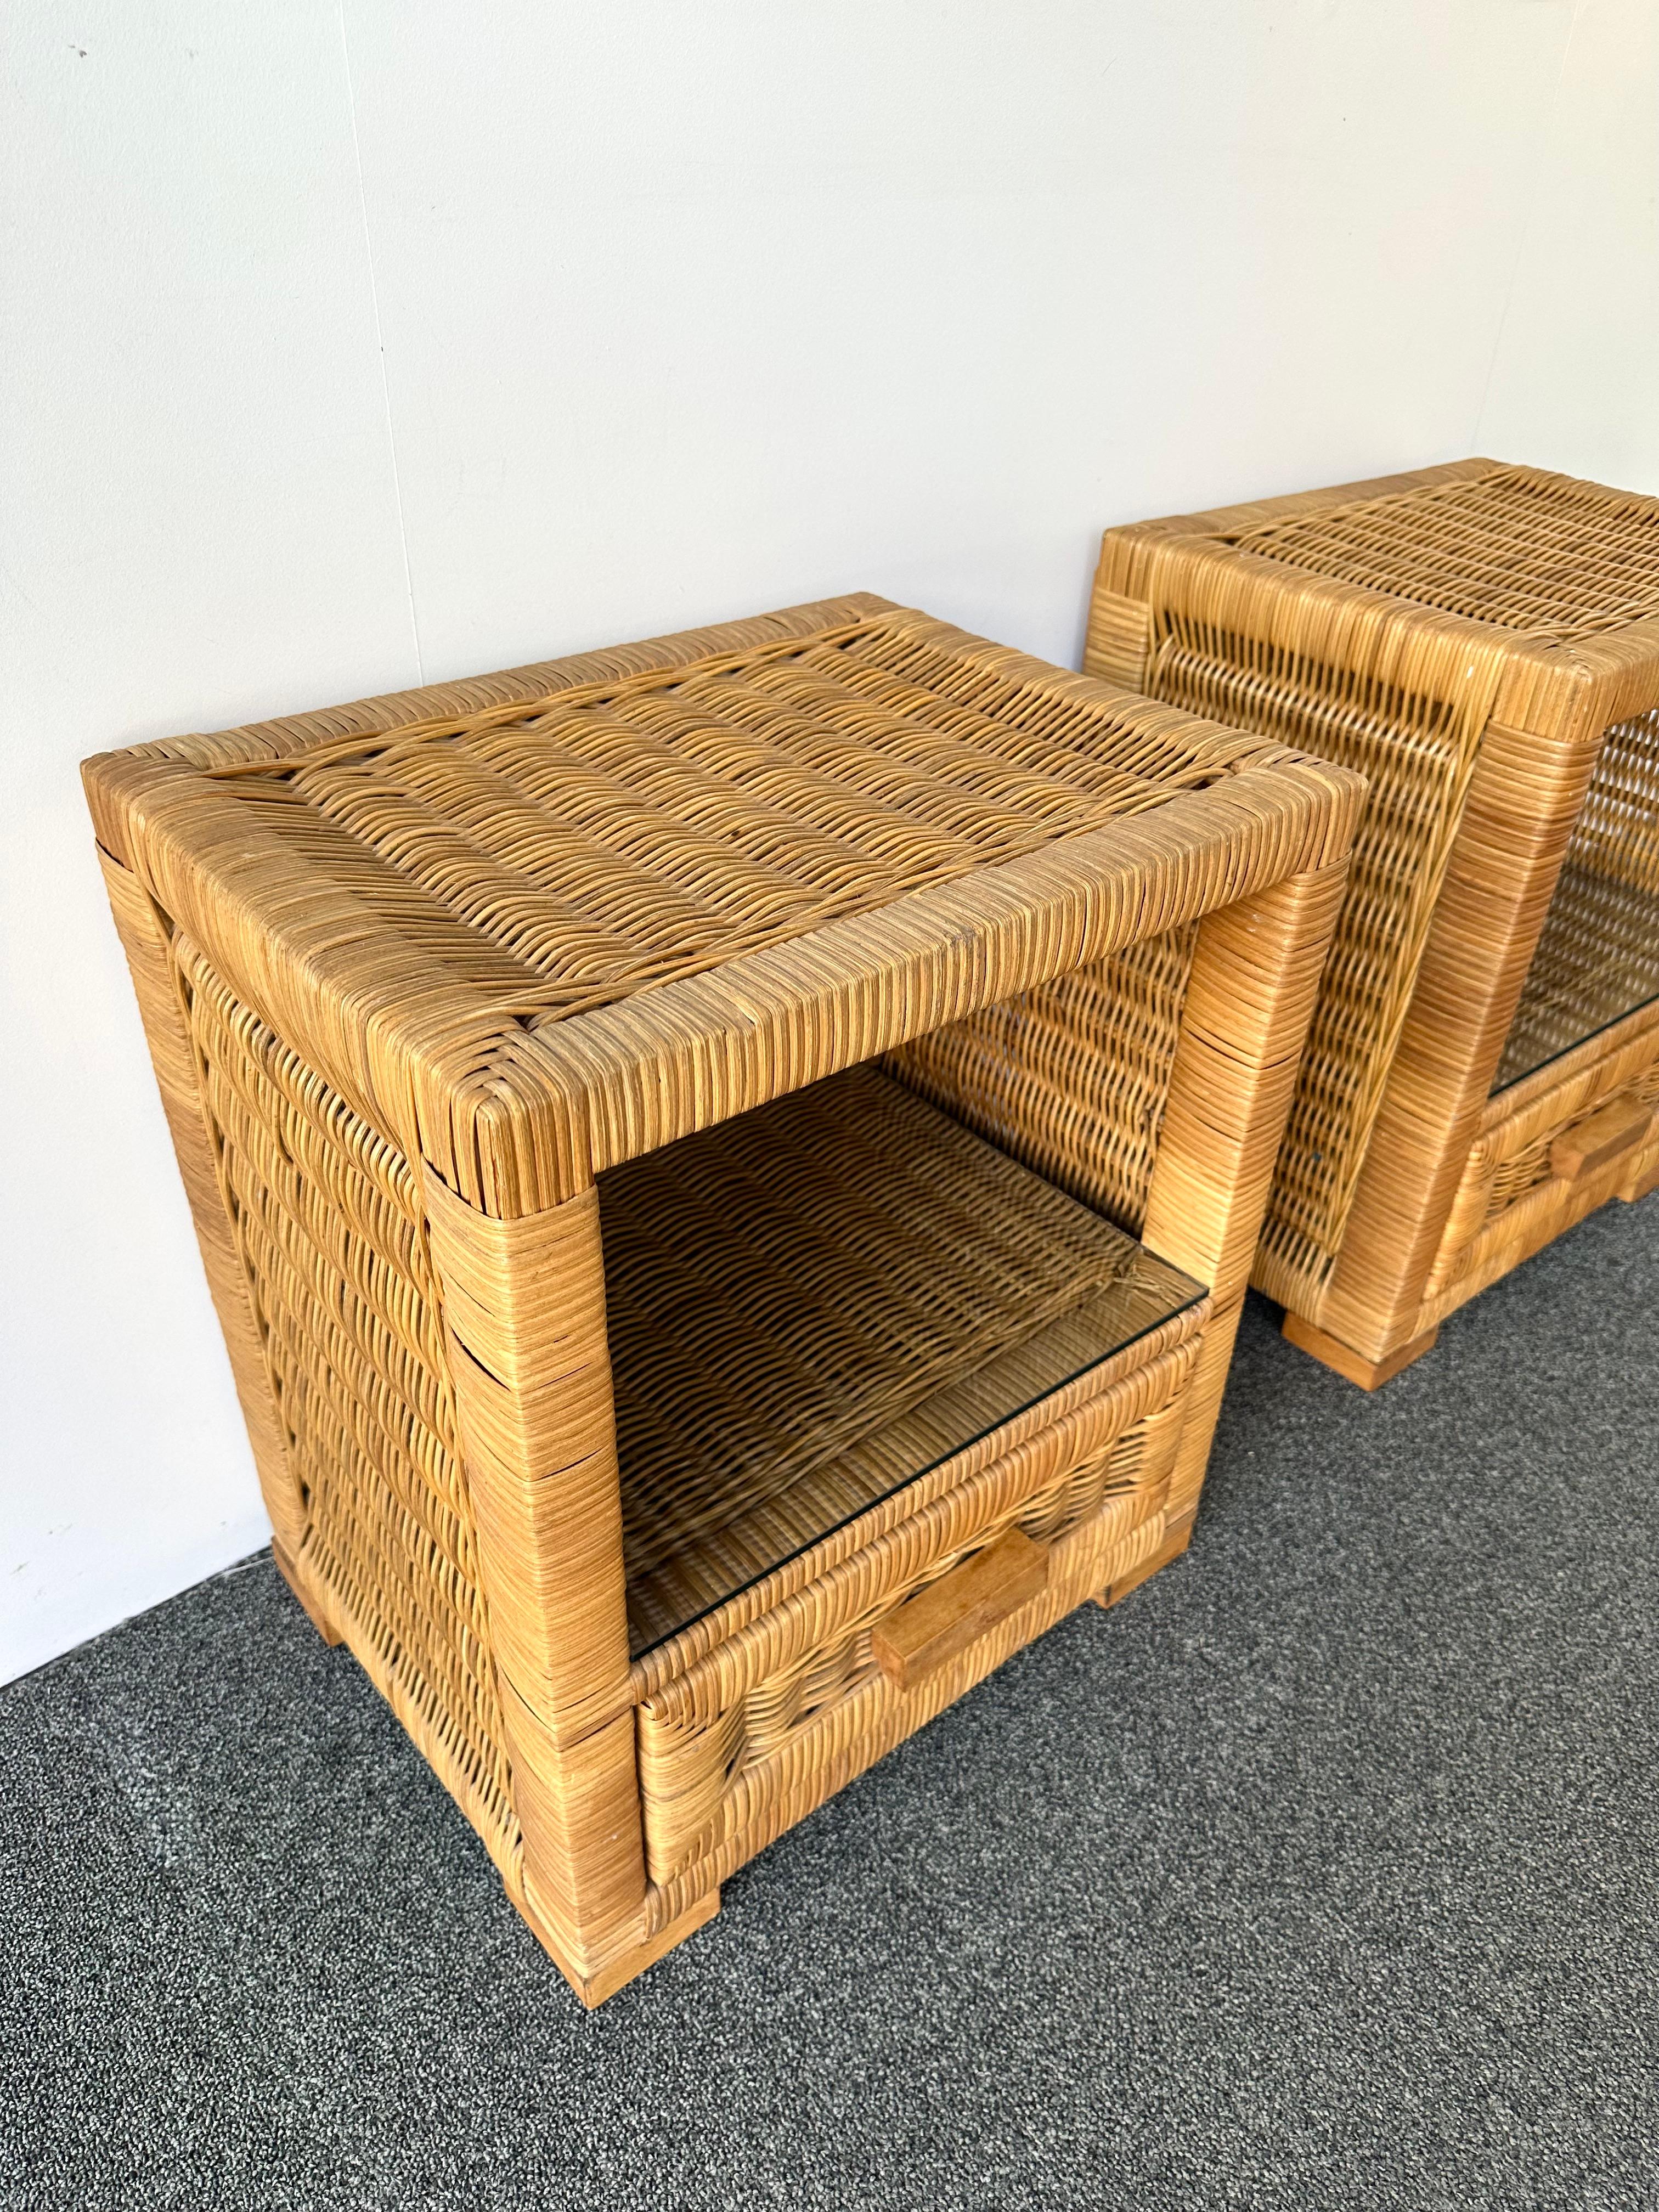 Glass Pair of Rattan Bedside Tables by Tito Agnoli, Italy, 1970s For Sale